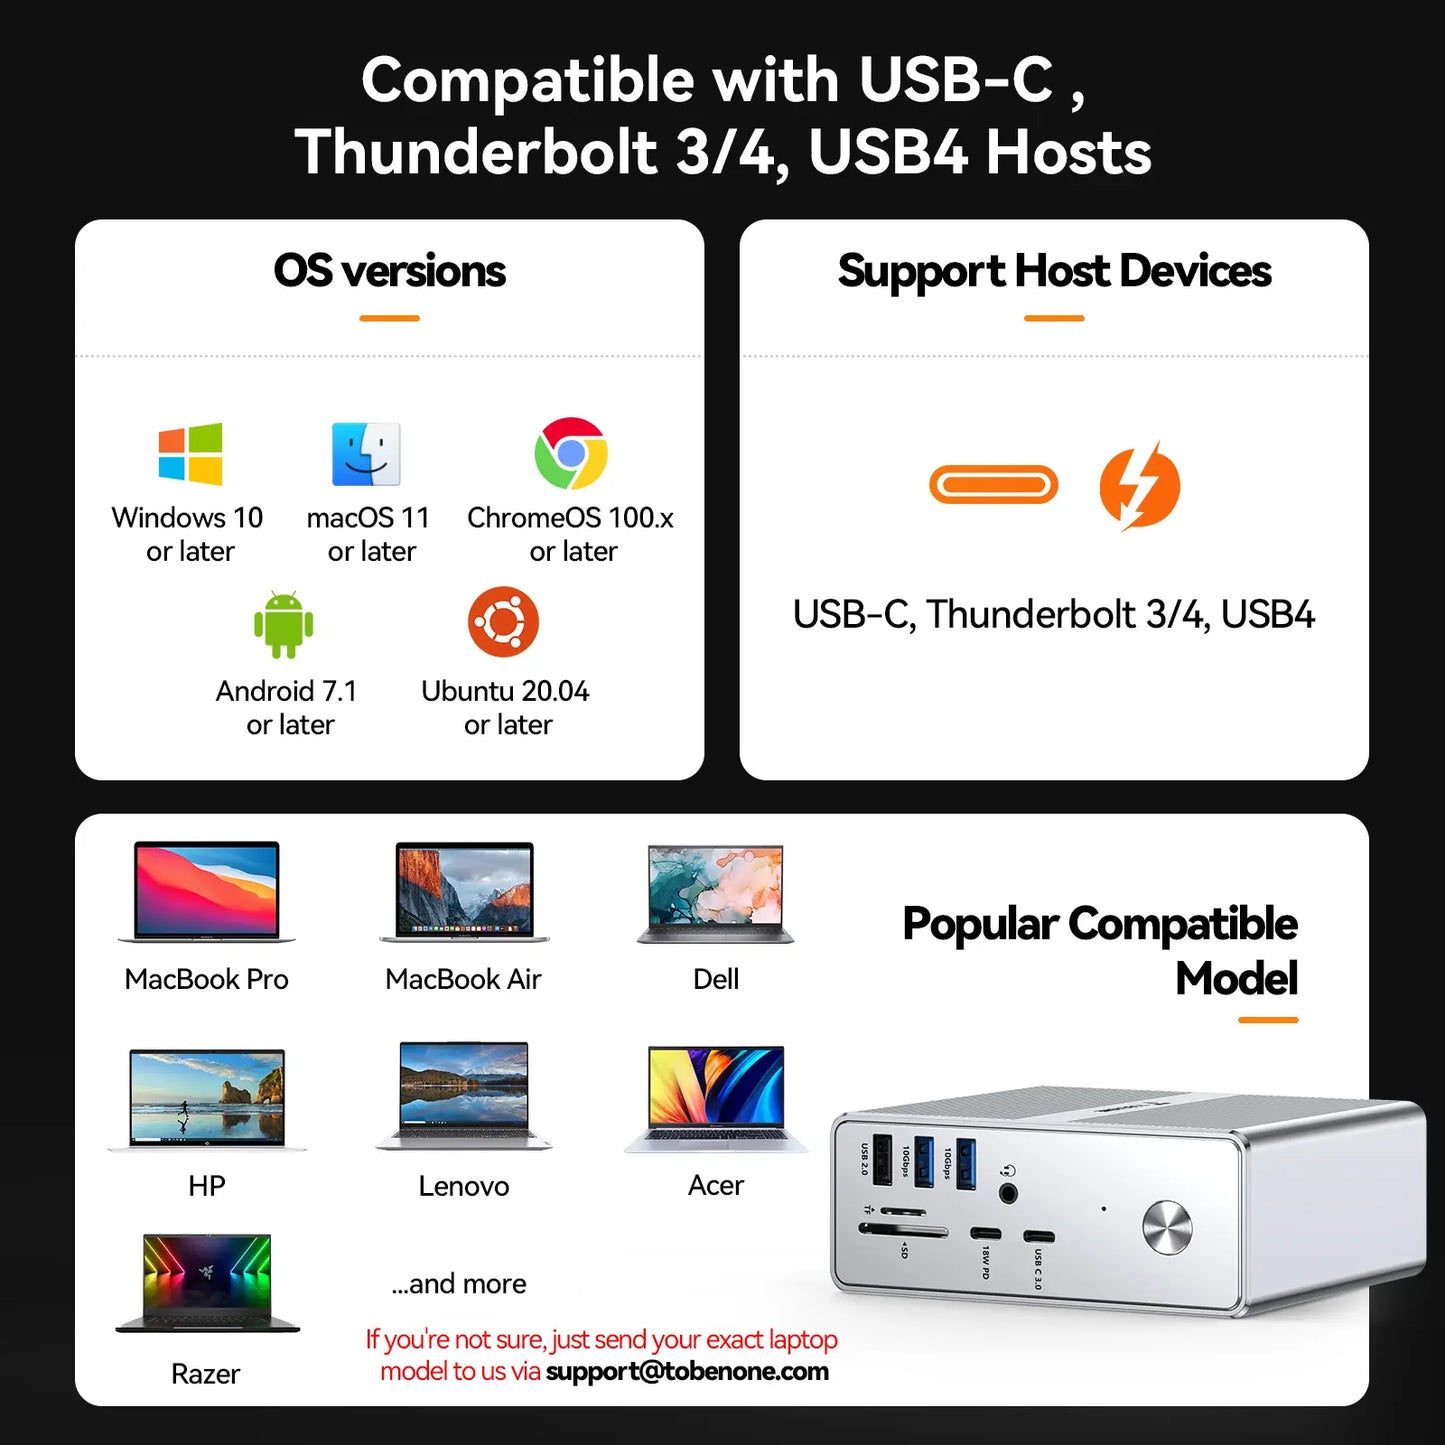 TobenONE UDS033B DisplayLink Docking Station 4 HDMI, 18-in-1 USB C Dock Included A 120W Power Adapter